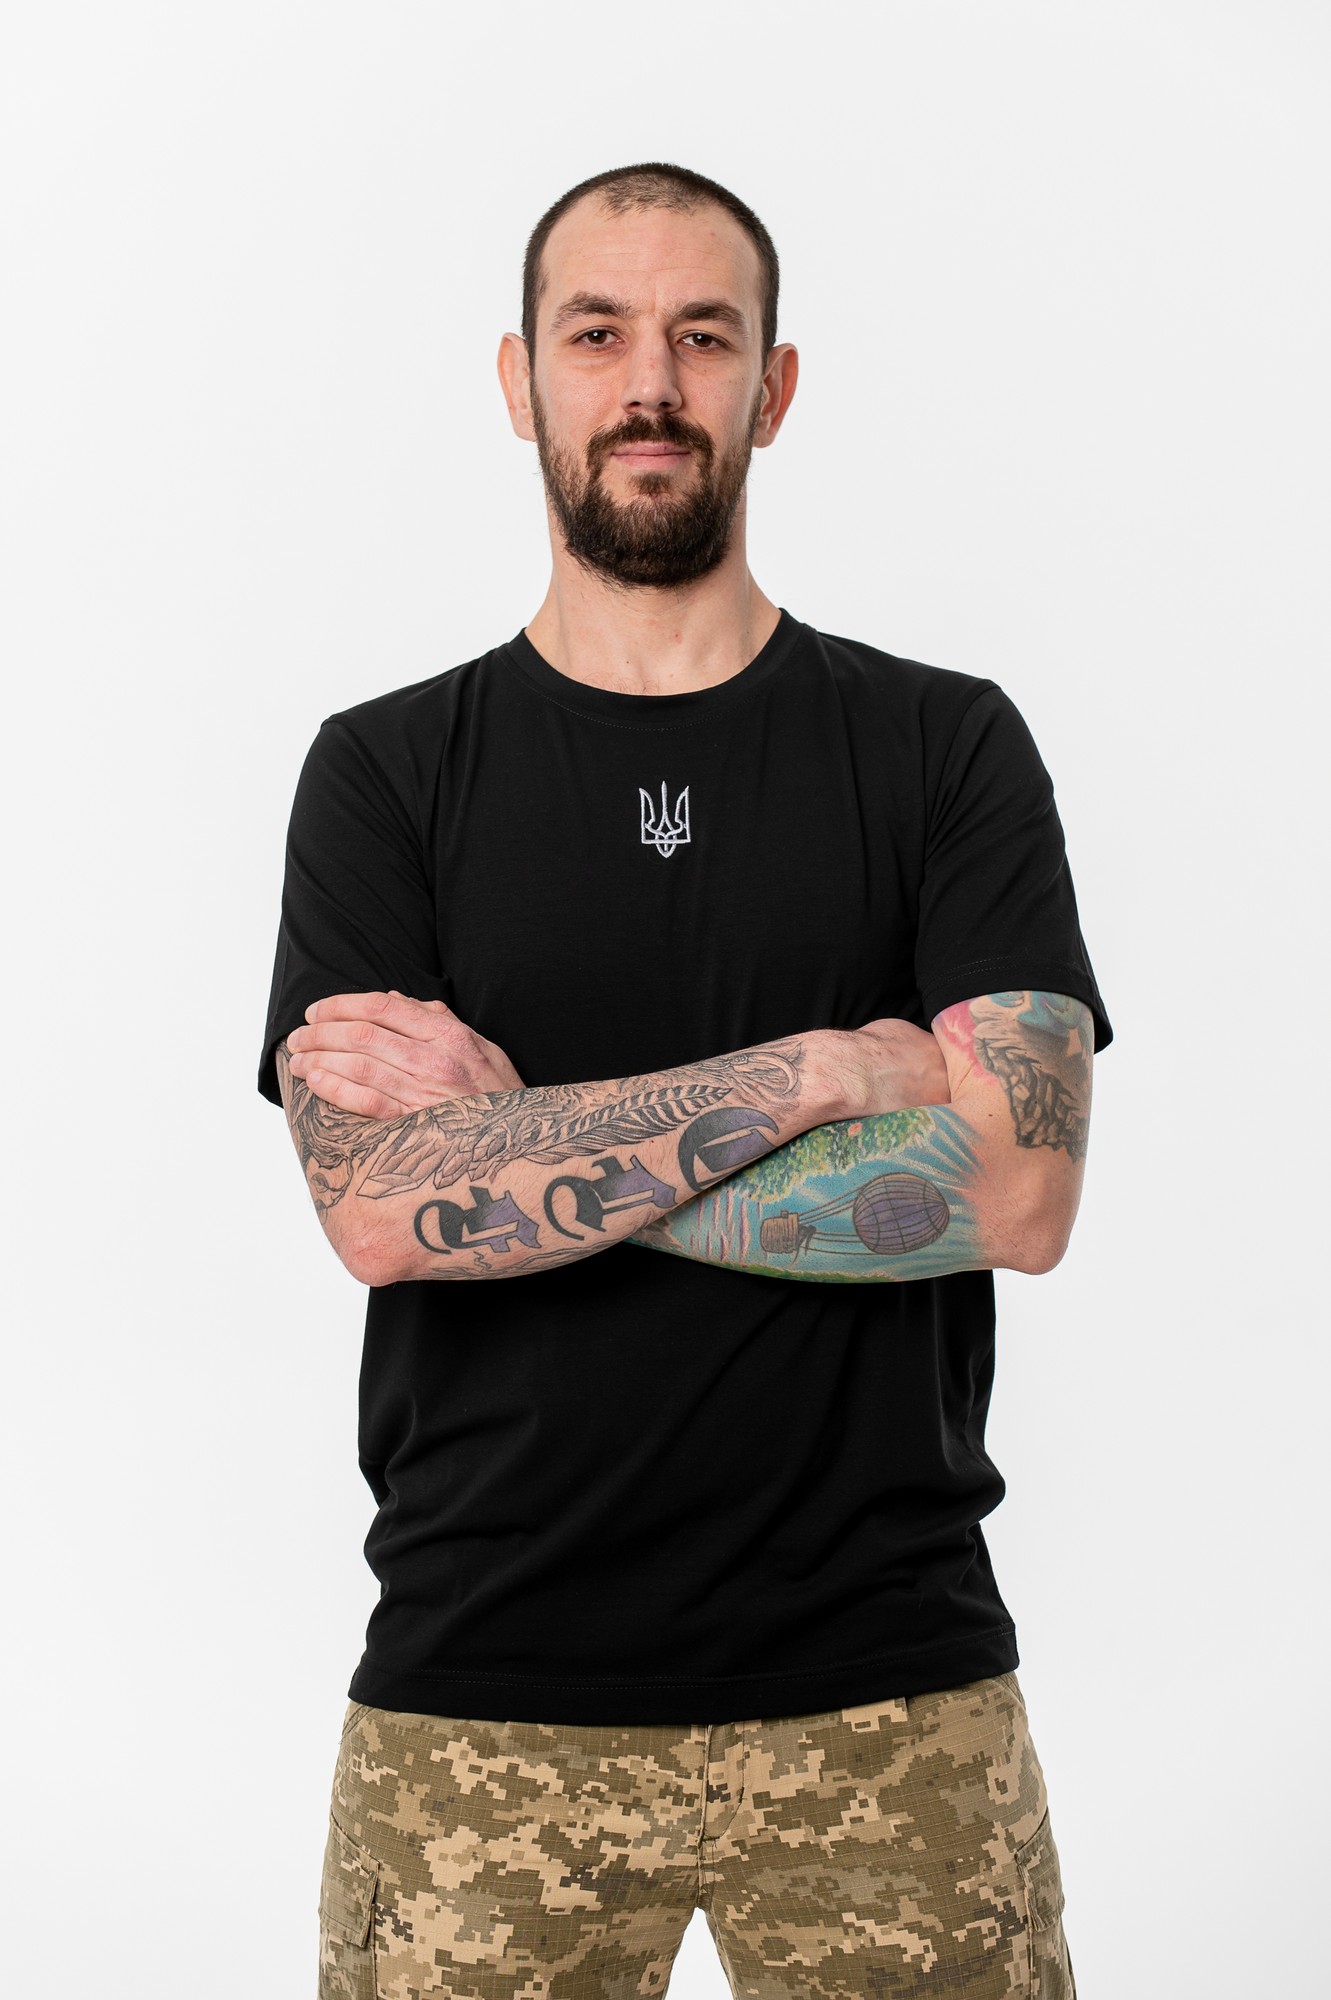 Men's t-shirt with embroidery "Classic tryzub" black